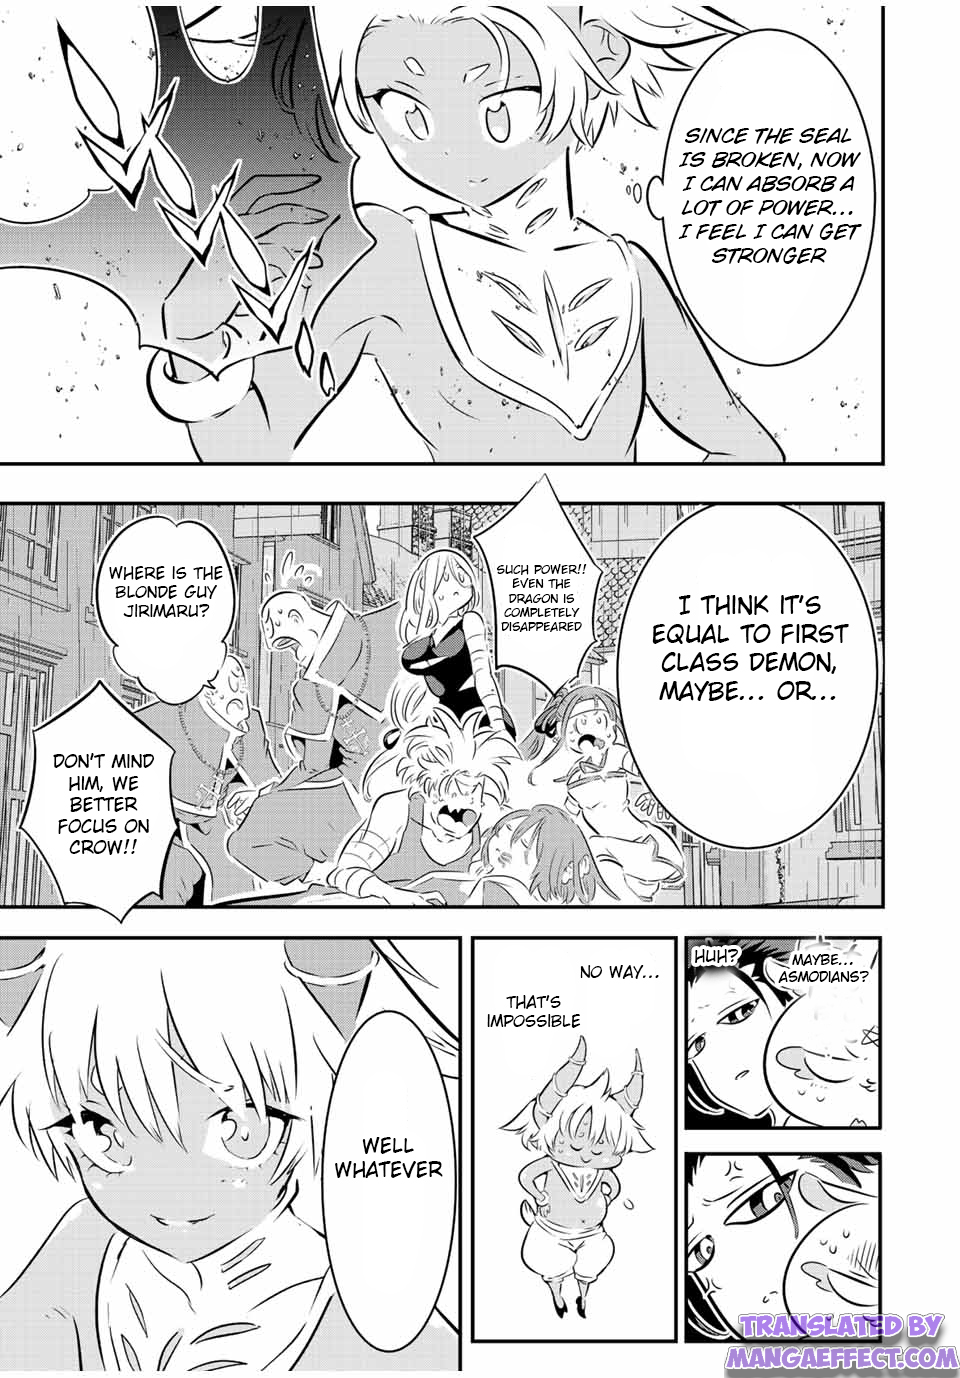 I Was Reincarnated As The 7th Prince So I Will Perfect My Magic As I Please Manga Reading English Chapter 80 Translated By Mangaeffect